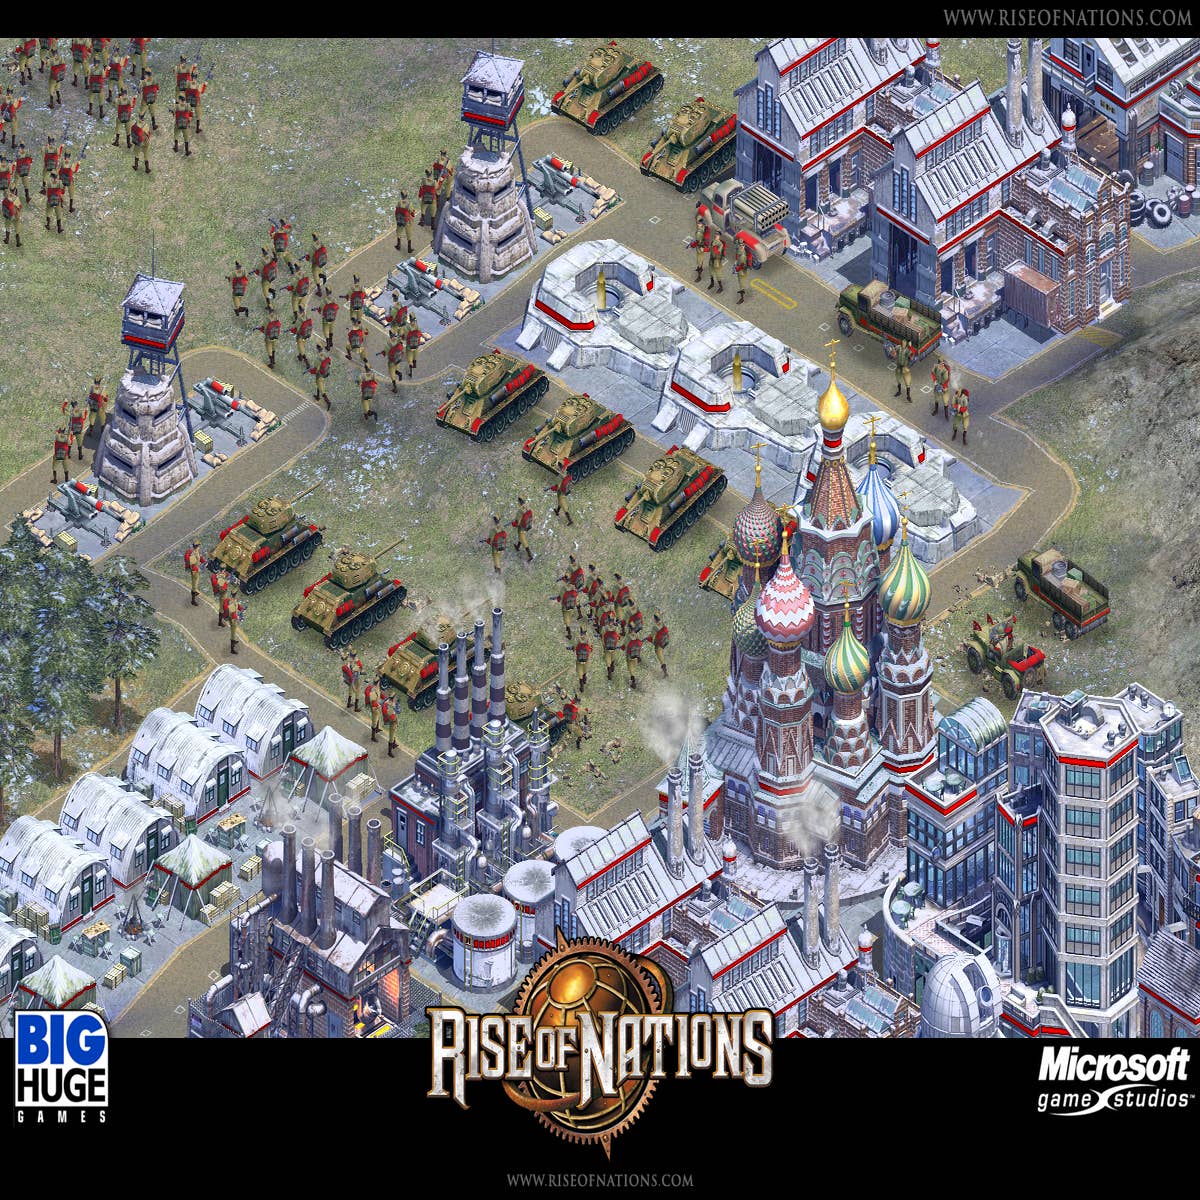 Giant Empires Private Server Event (Rise Of Nations) 